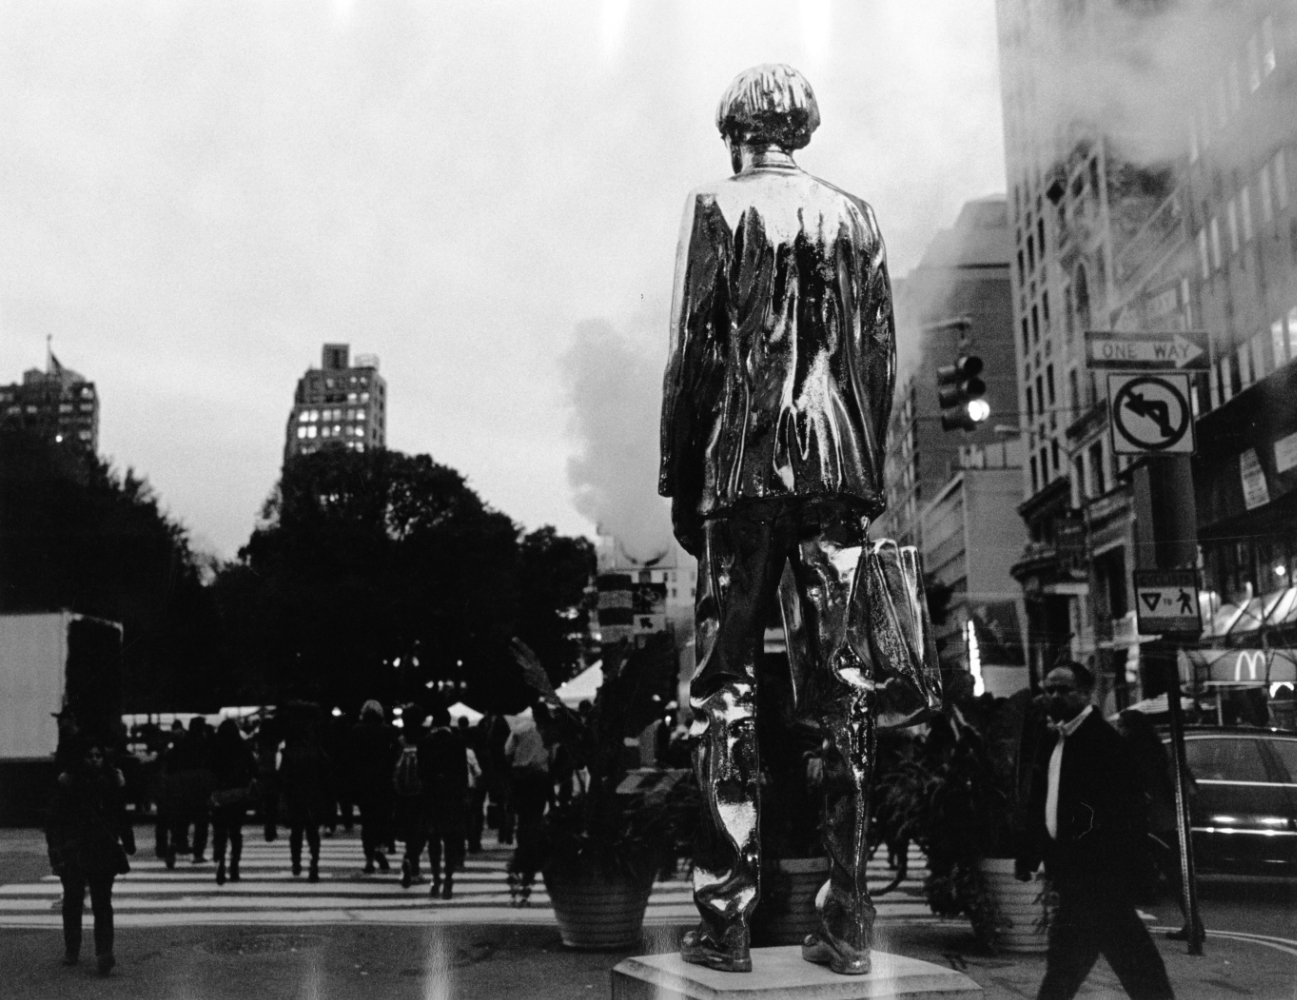 thumbnail of Untitled by James Kim. medium: gelatin silver print. date: 2011. dimensions: 11 x 14 inches